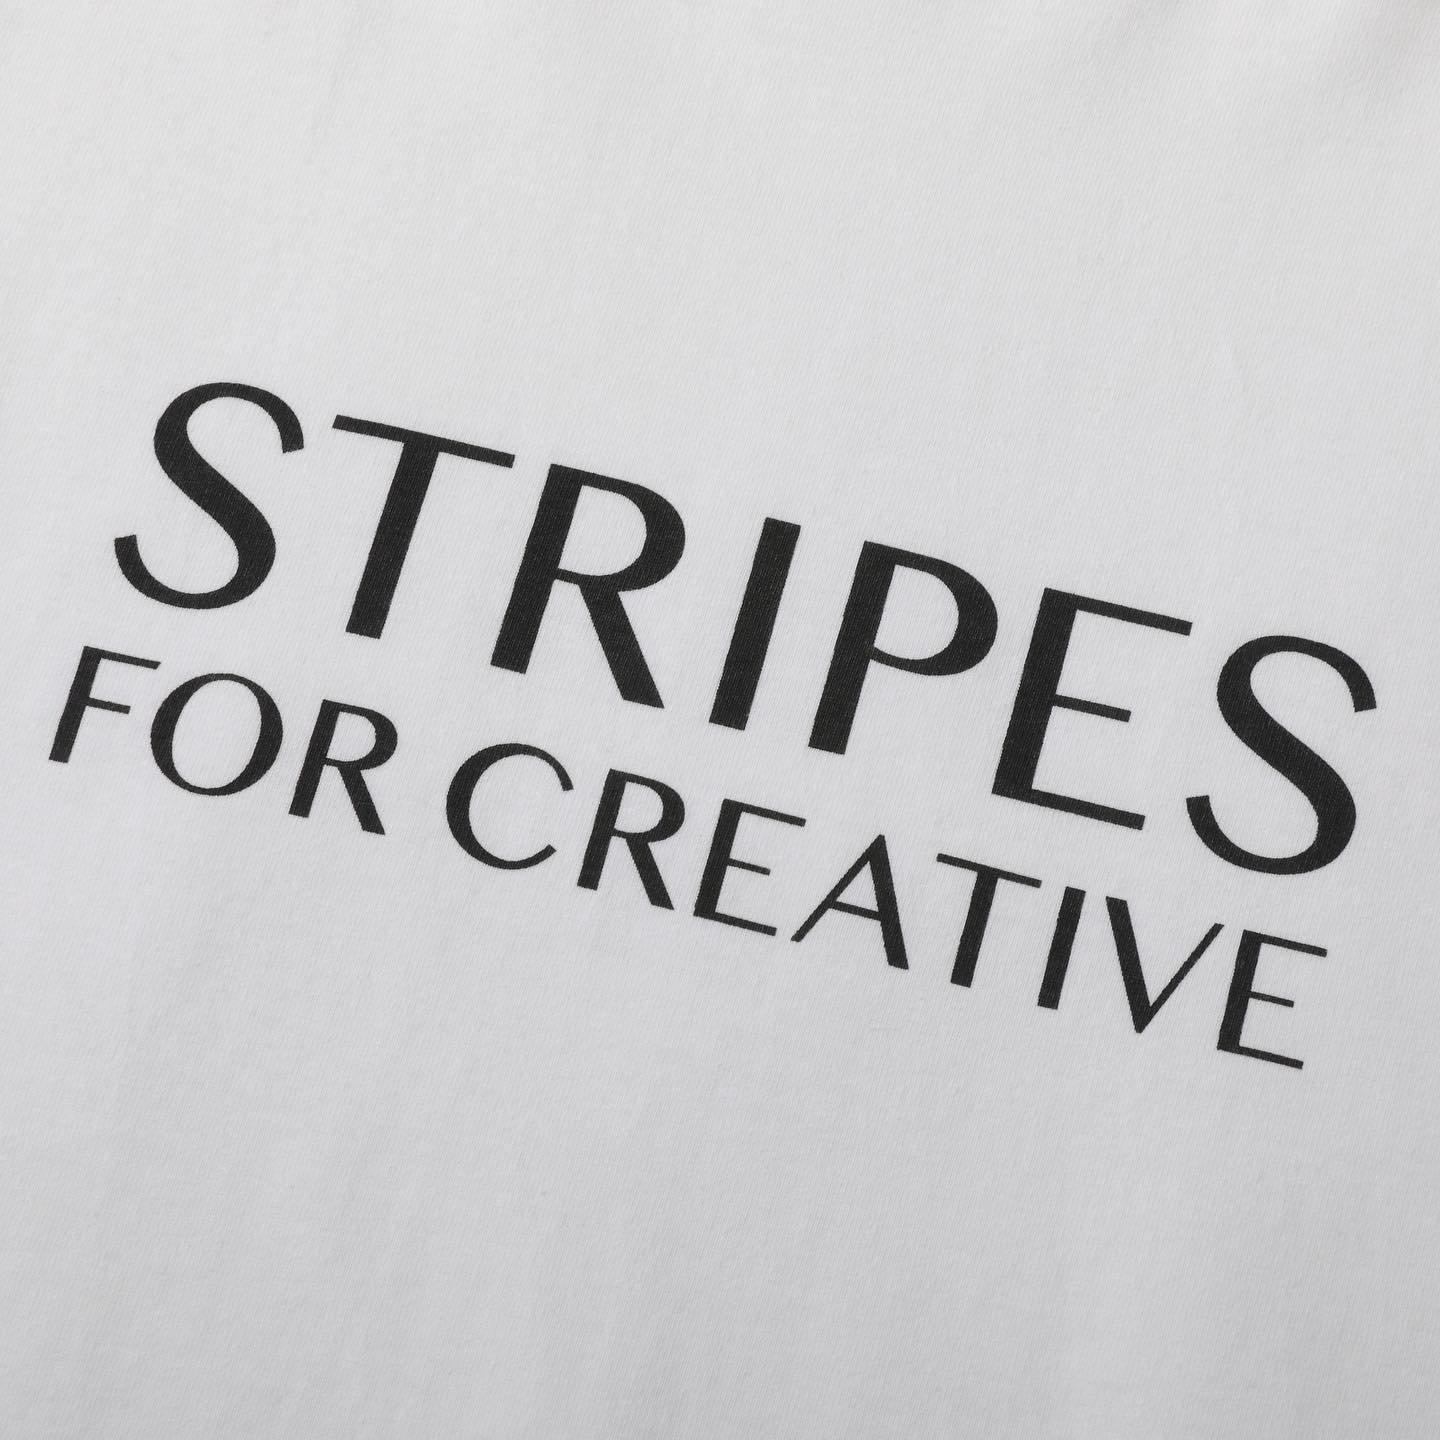 STRIPES FOR CREATIVE SUPER BIG ROUND LS TEE – unexpected store